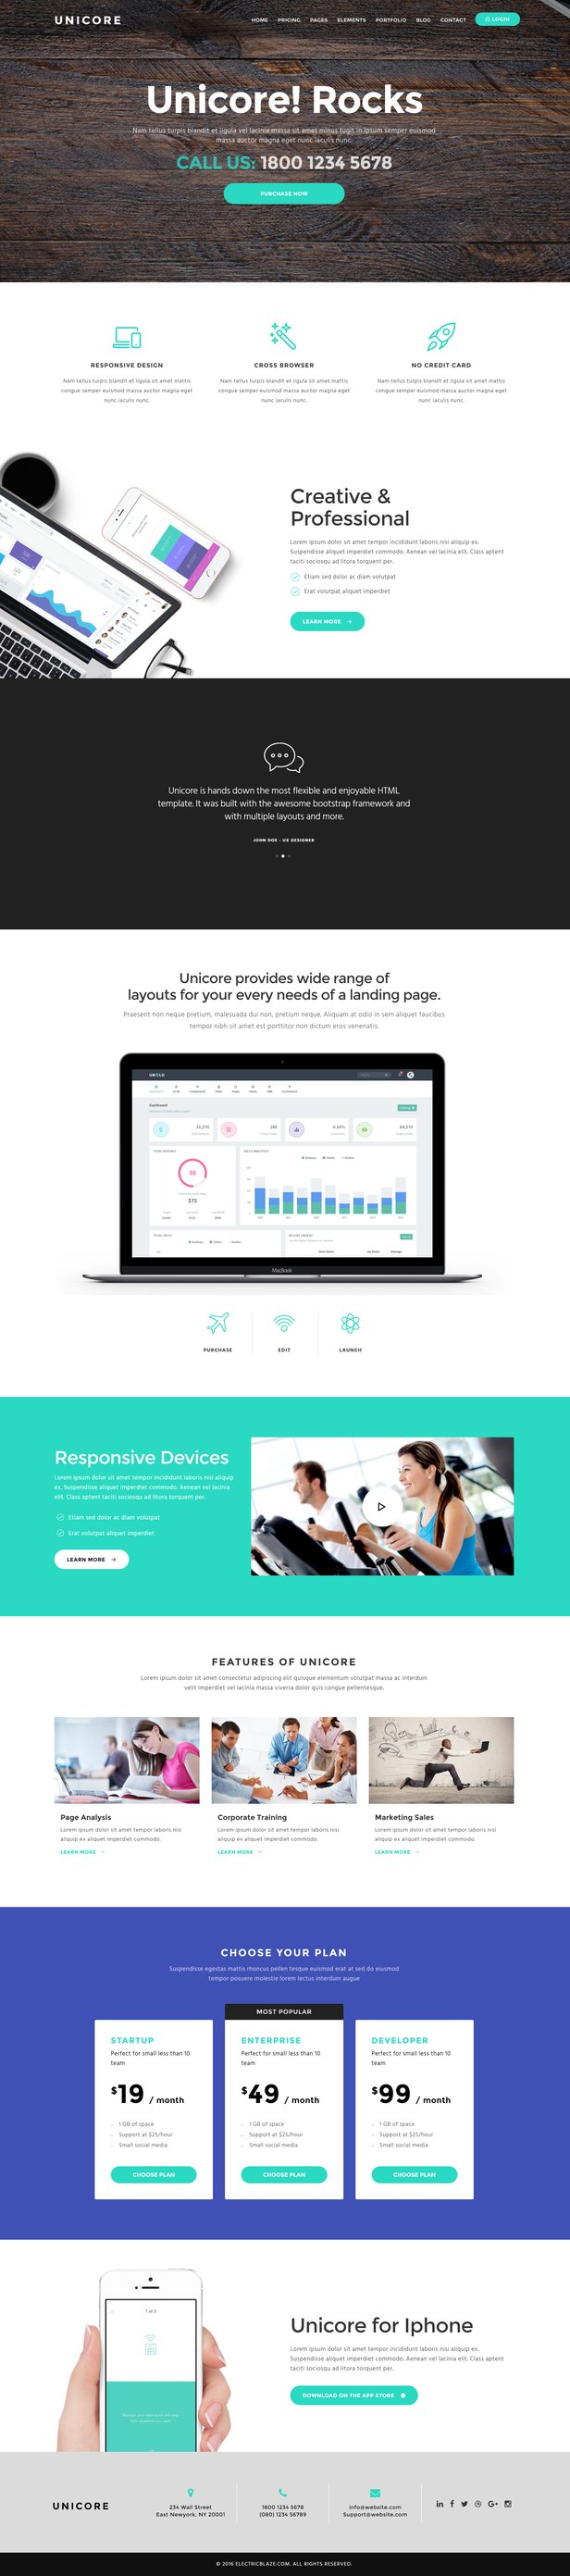 Unicore - Mobirise Builder with 20 HTML Bootstrap Landing Page Templates - 8